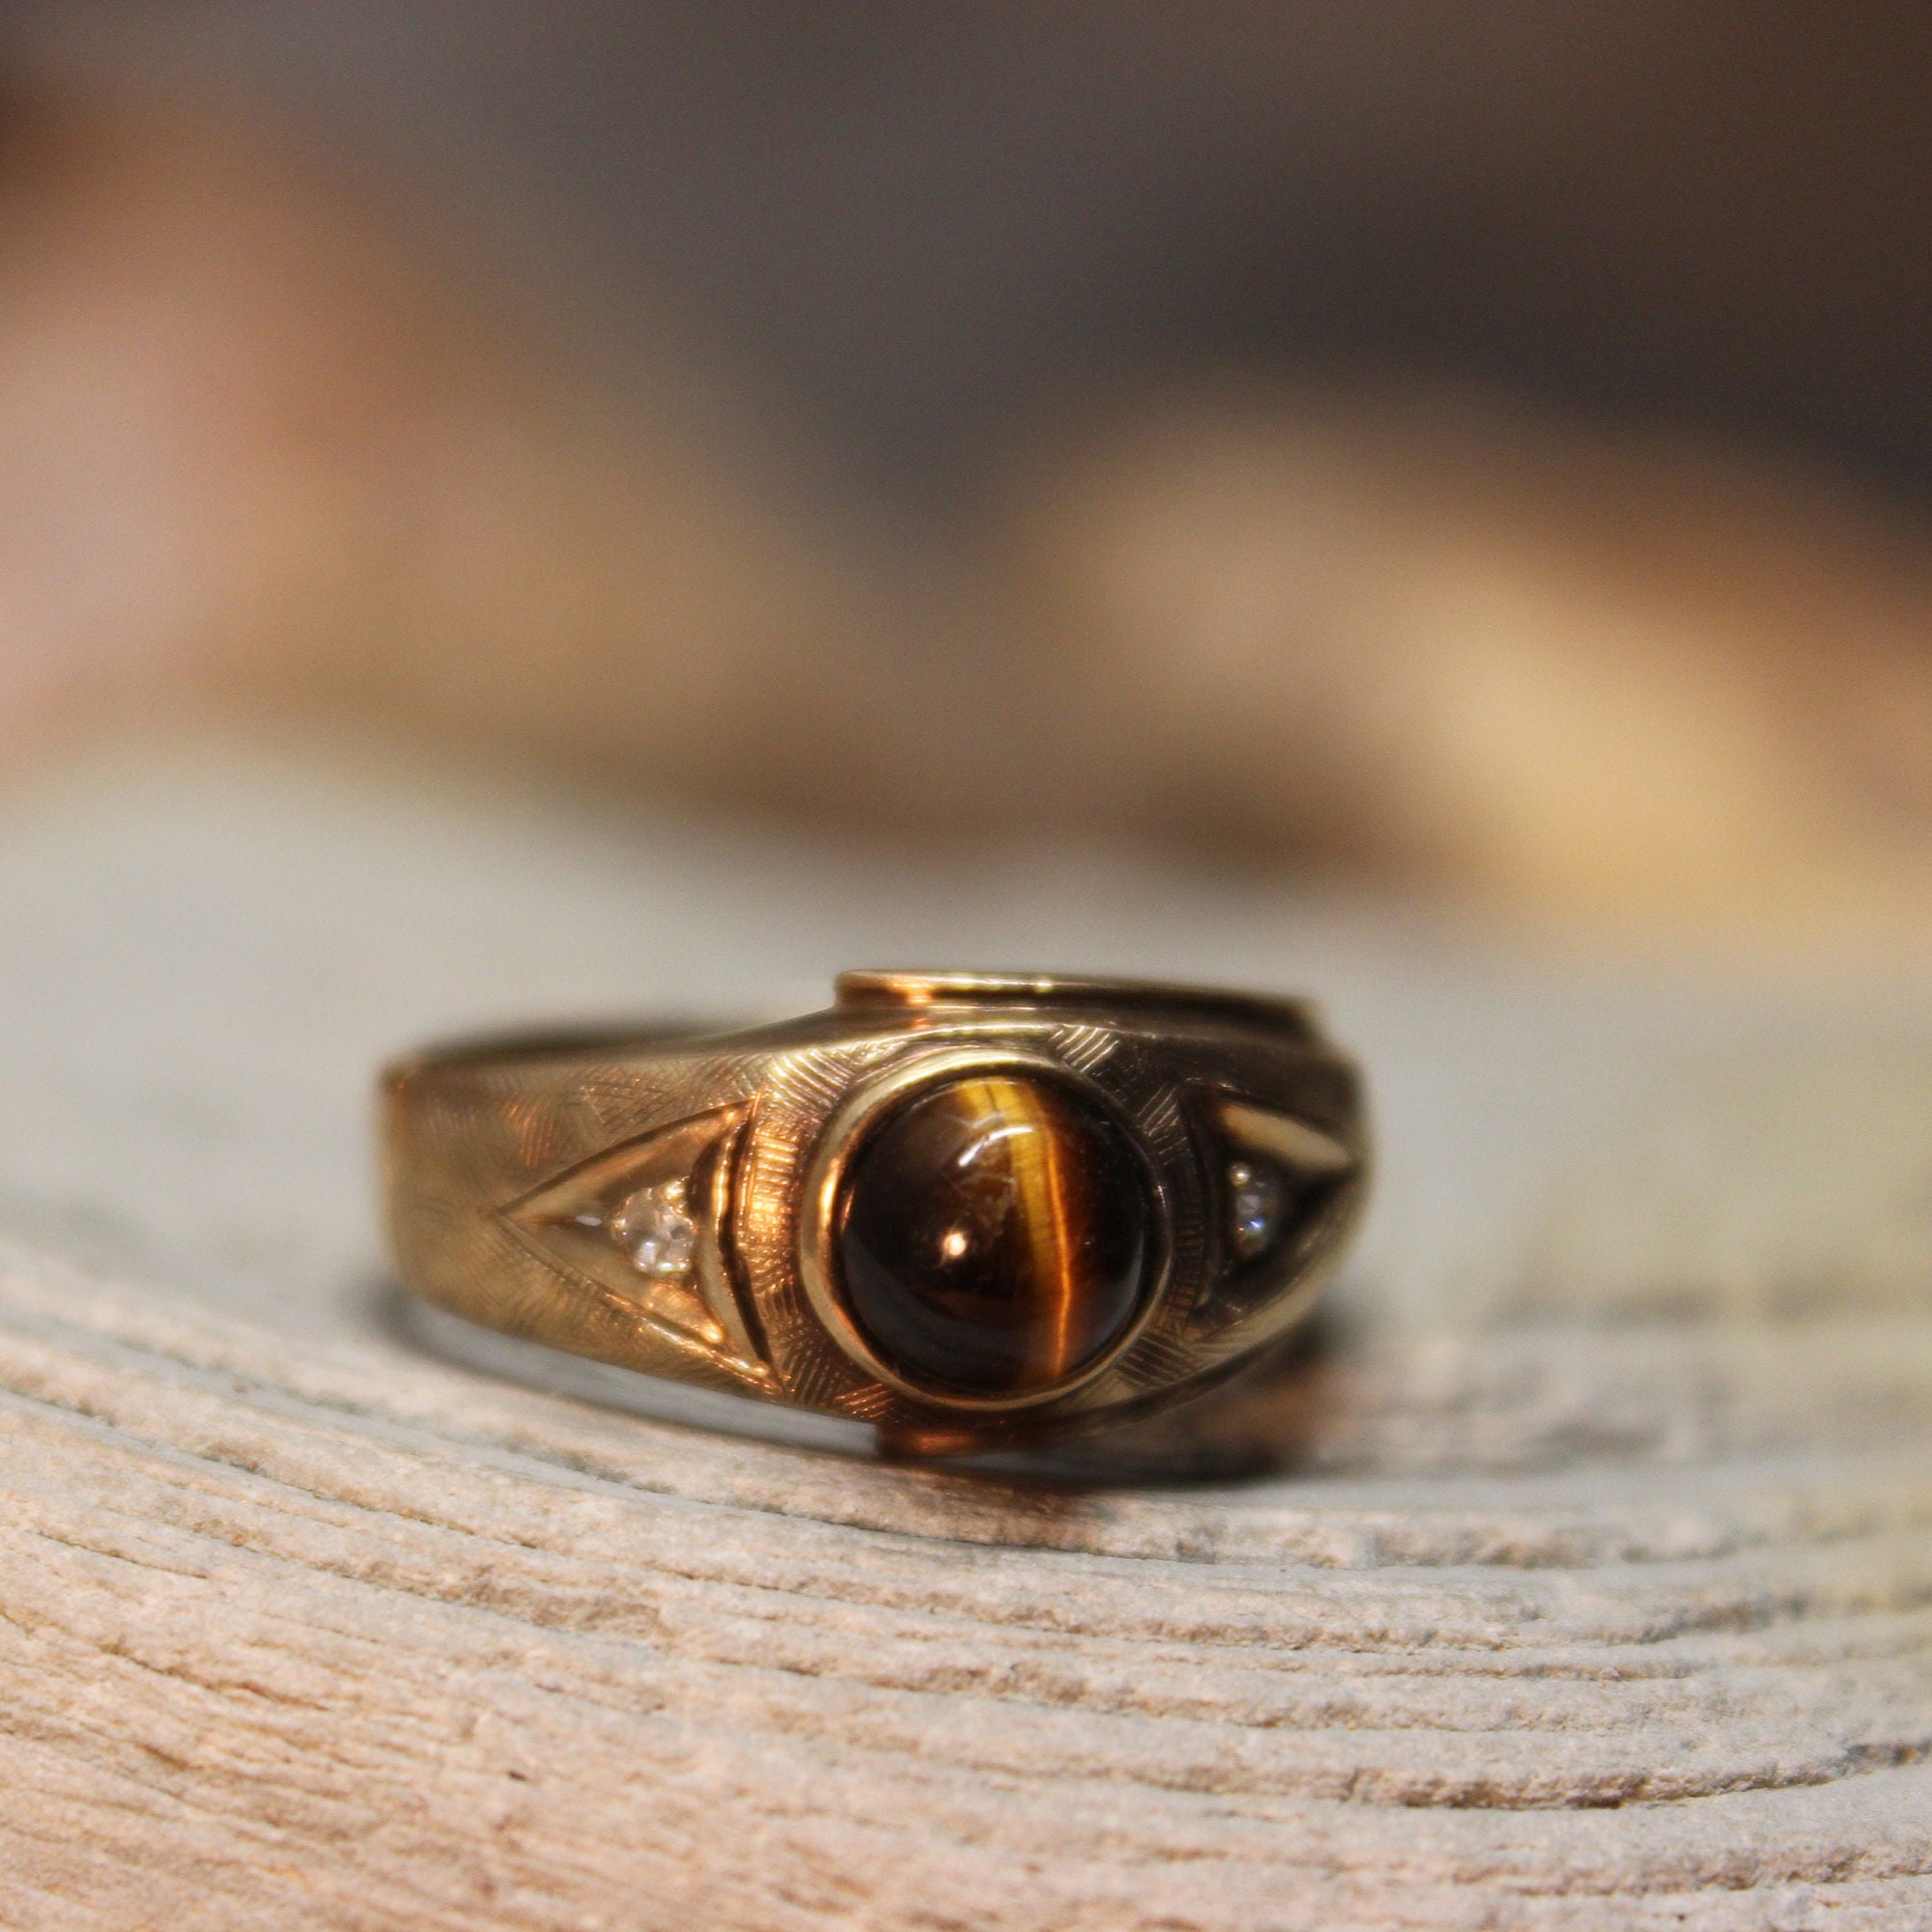 1960s Vintage Mens Tigers Eye And Diamond Ring 45 Grams Size 9 Solid